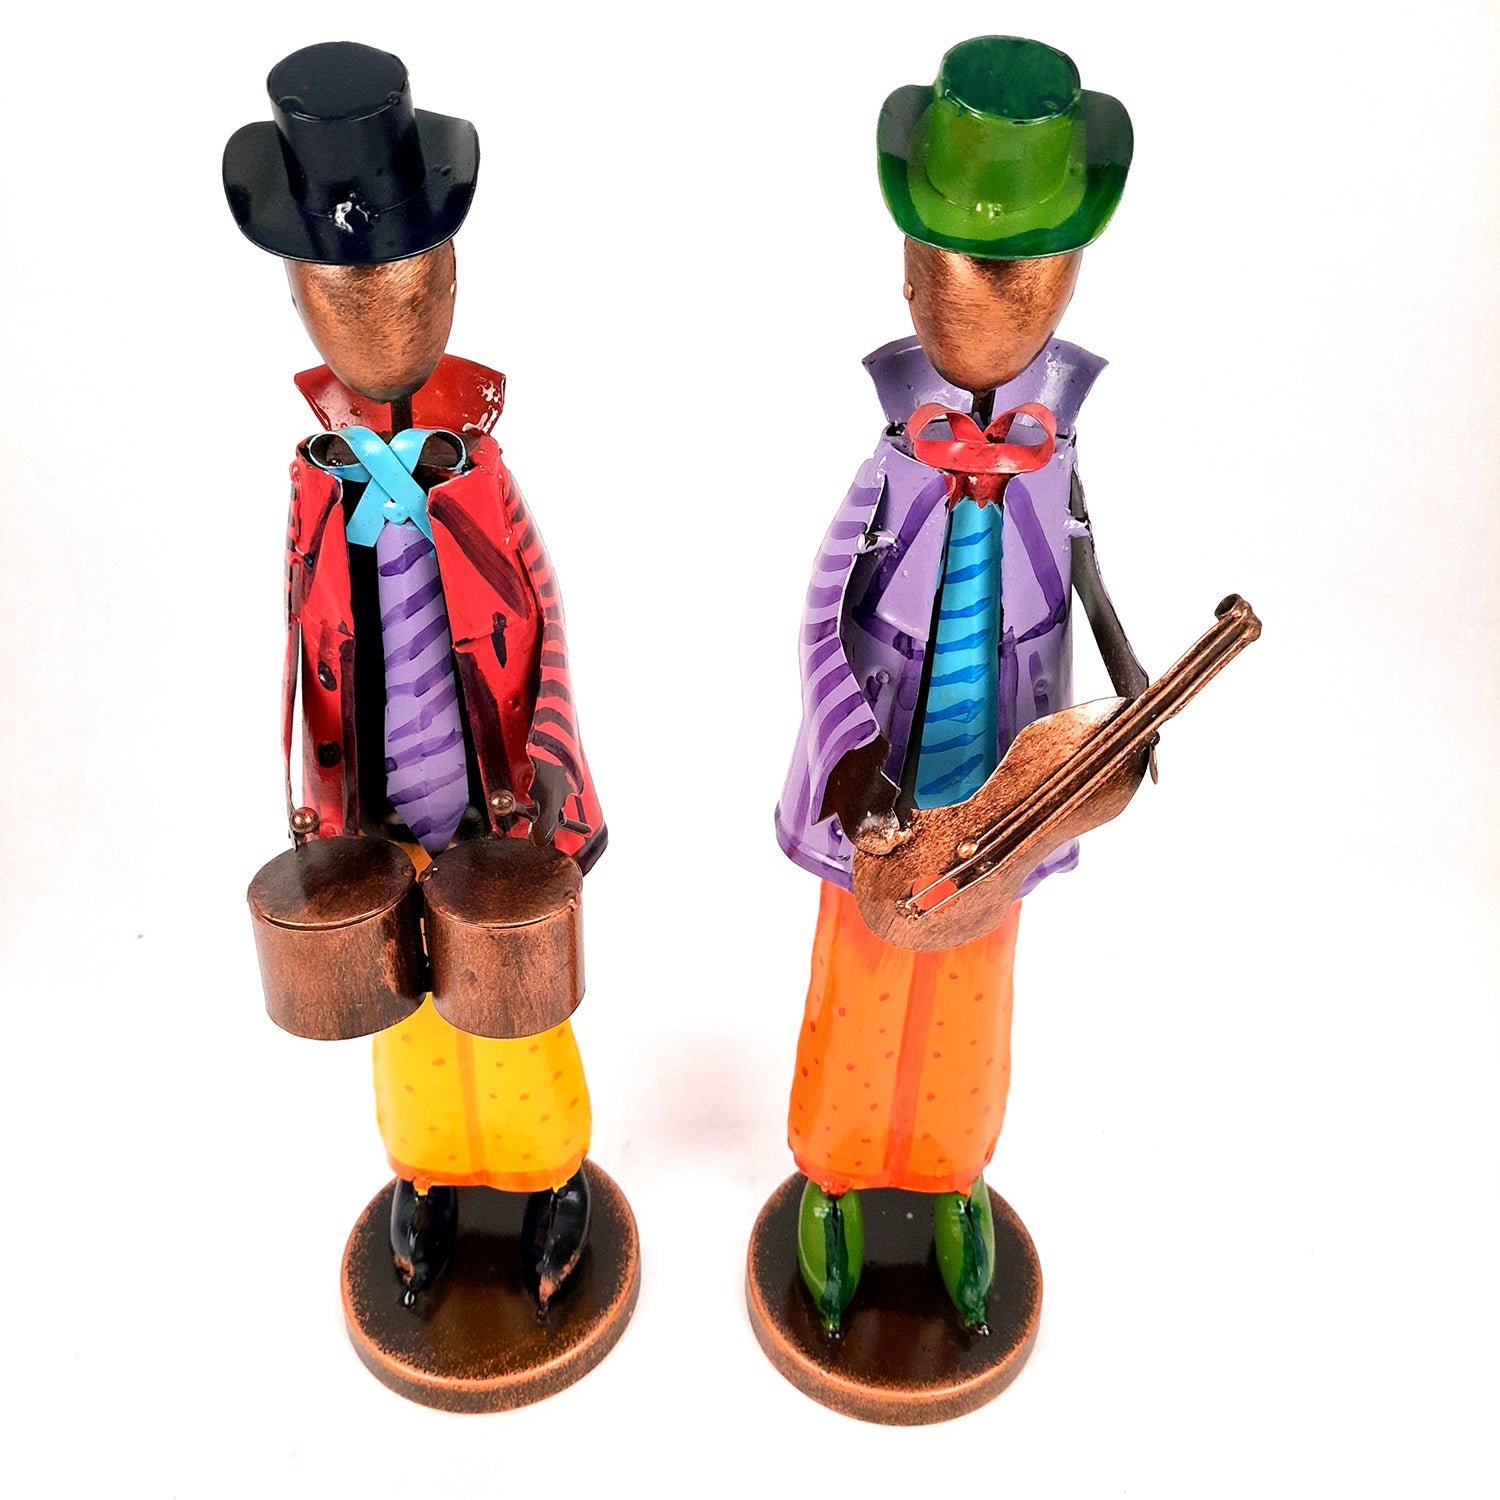 Showpiece Set - Retro Theme Musician Playing Musical Instruments | Decorative Big Figurines - For Home, Table, Living Room & TV Unit Decor & Gifts - 16 Inch (Set of 2) - Apkamart